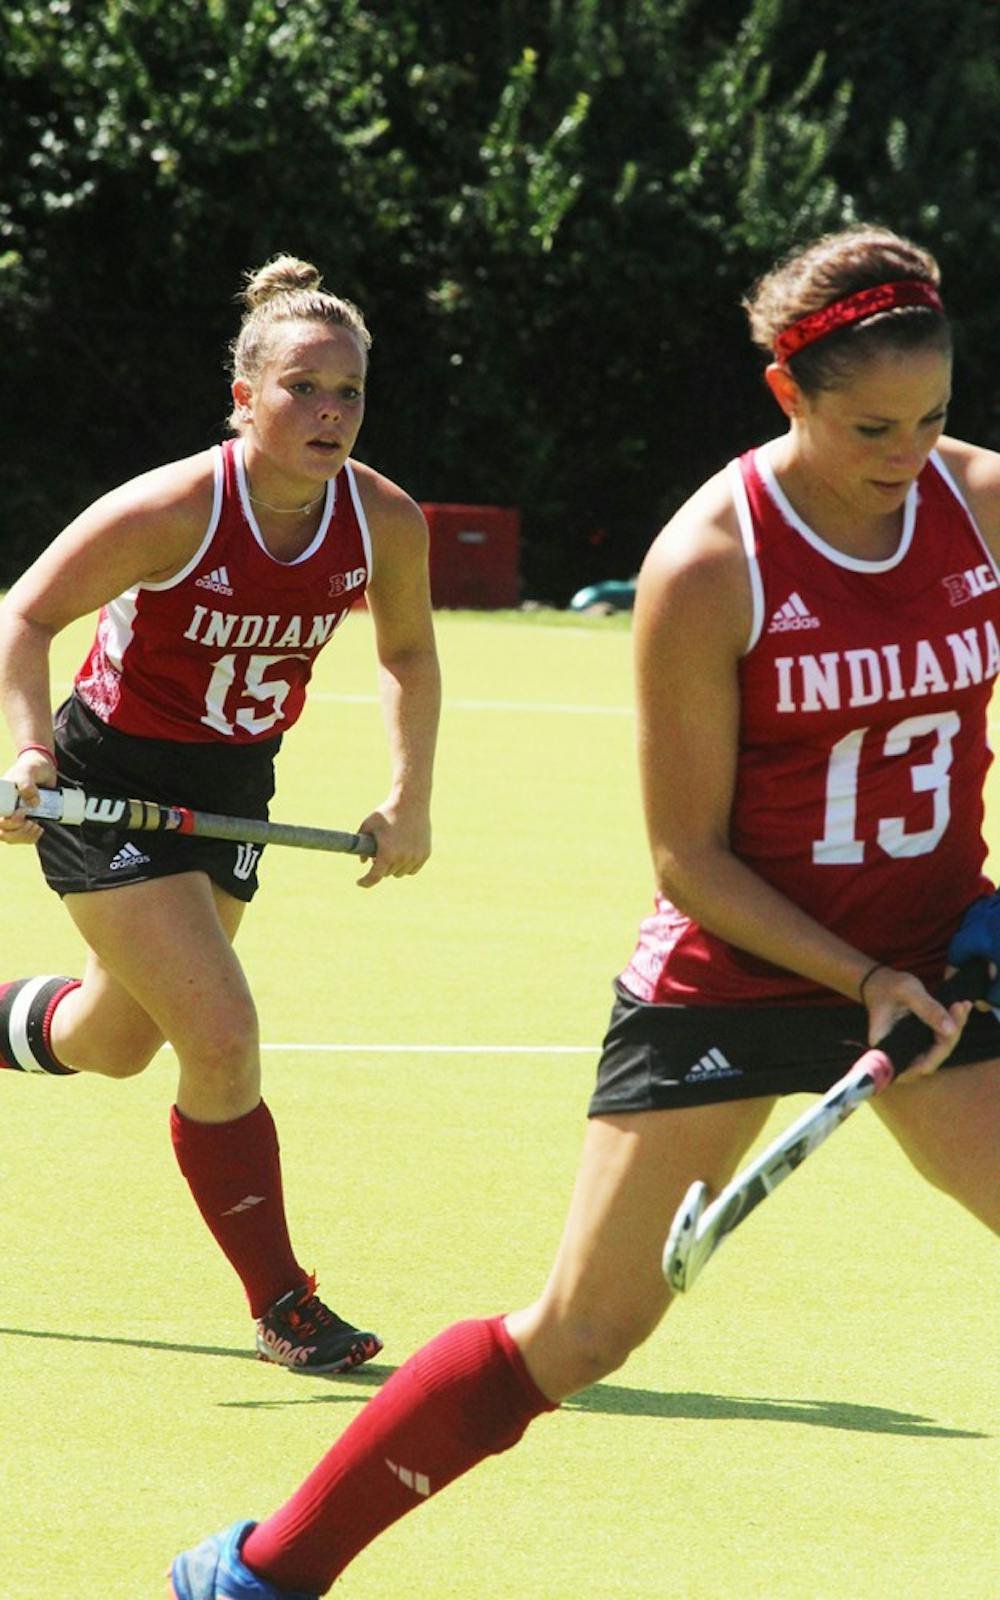  IU Field Hockey players, Kate Barber and Morgan Dye work together in their game Sunday against the University of New Hampshire. 